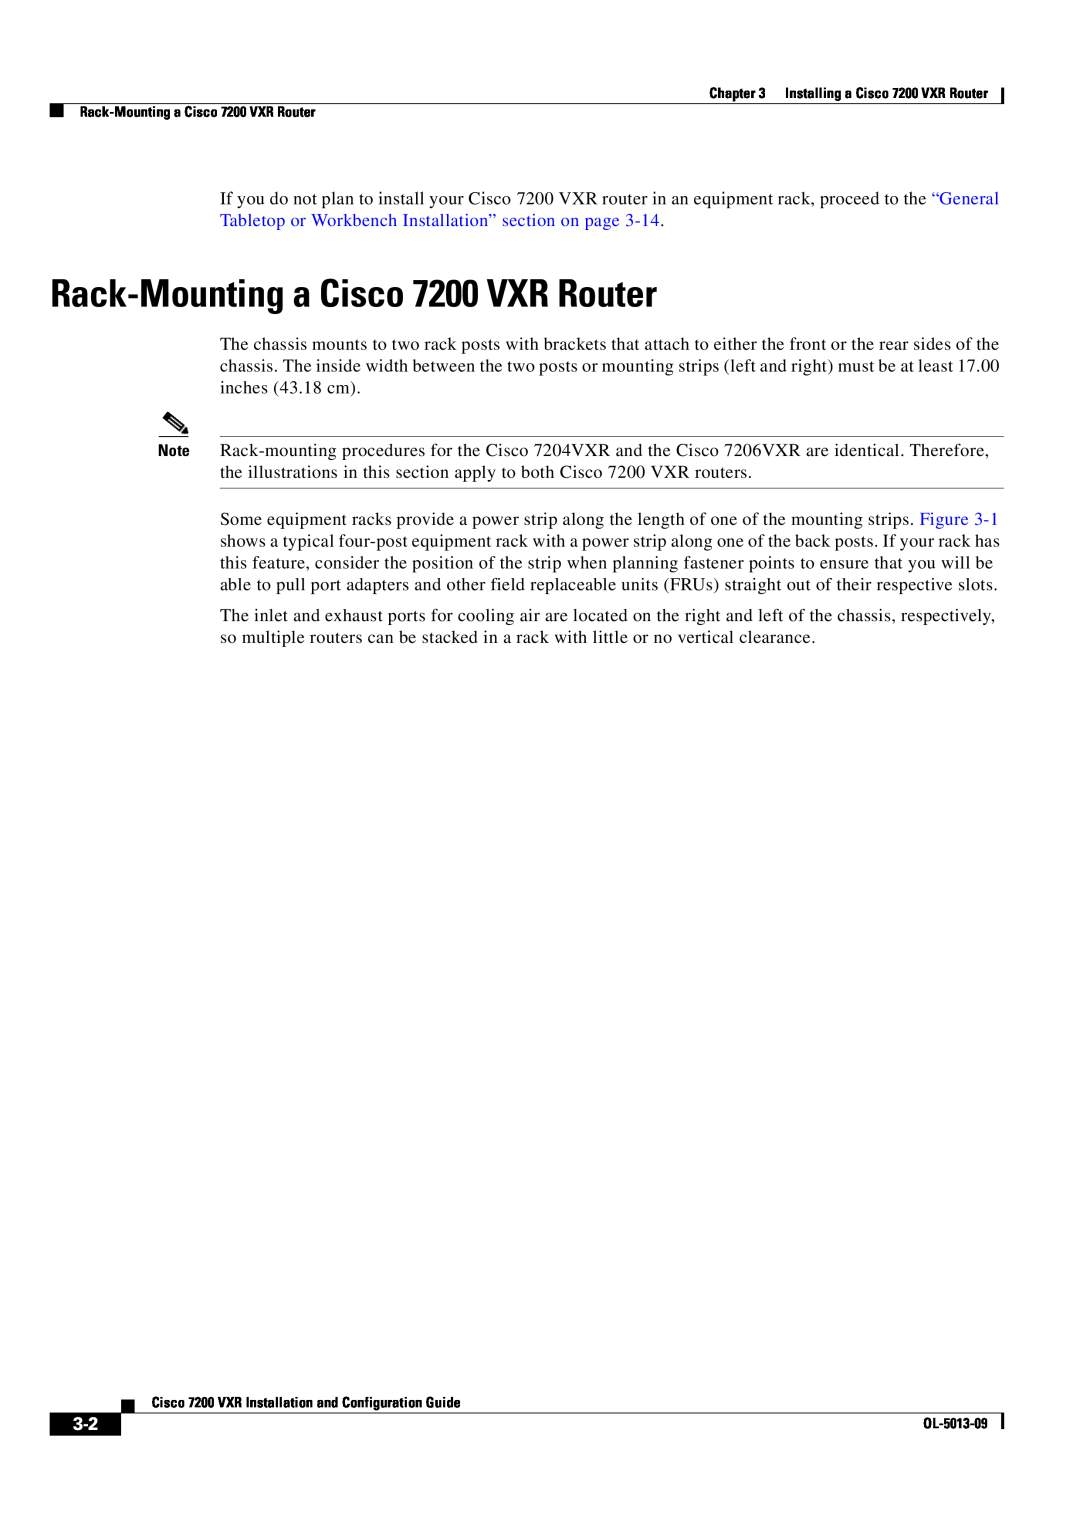 Cisco Systems manual Rack-Mounting a Cisco 7200 VXR Router 